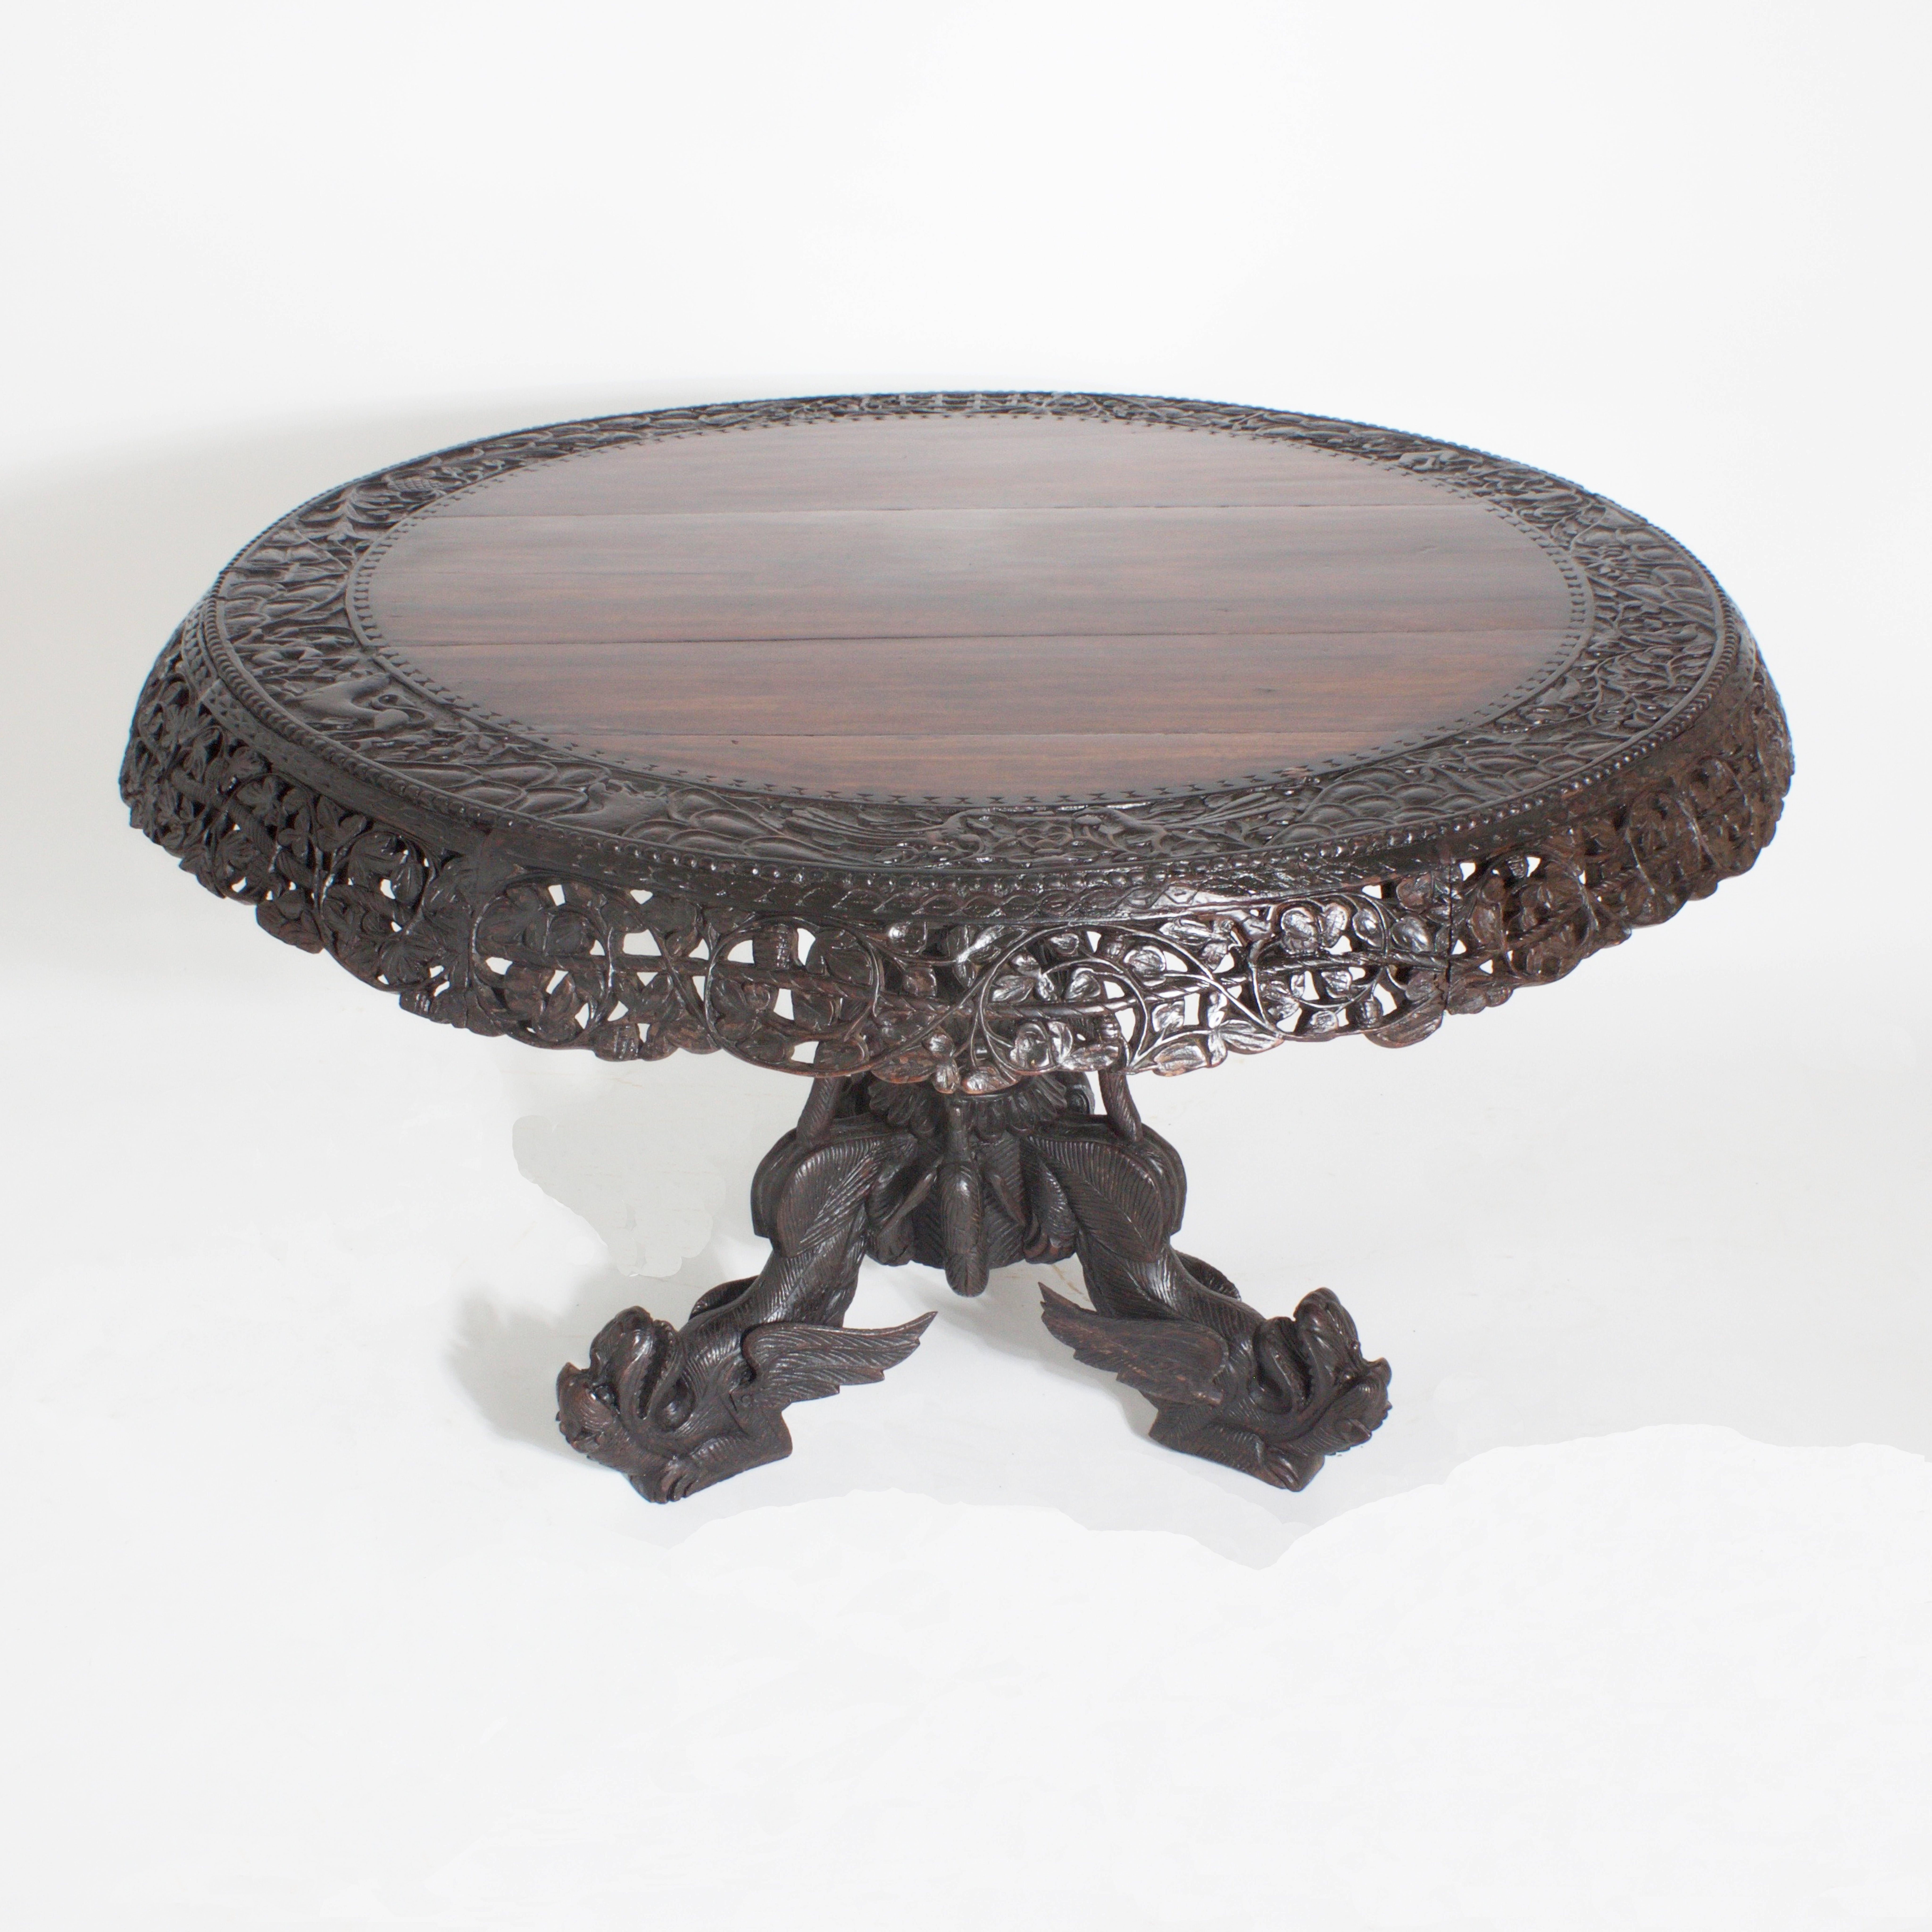 Here is a rare and considerable antique carved Bombay blackwood Anglo Indian center table. Having a carved floral top border and skirt. The base features carved acanthus leaves, snakes, birds and dragons. One of the best pieces of fantasy furniture